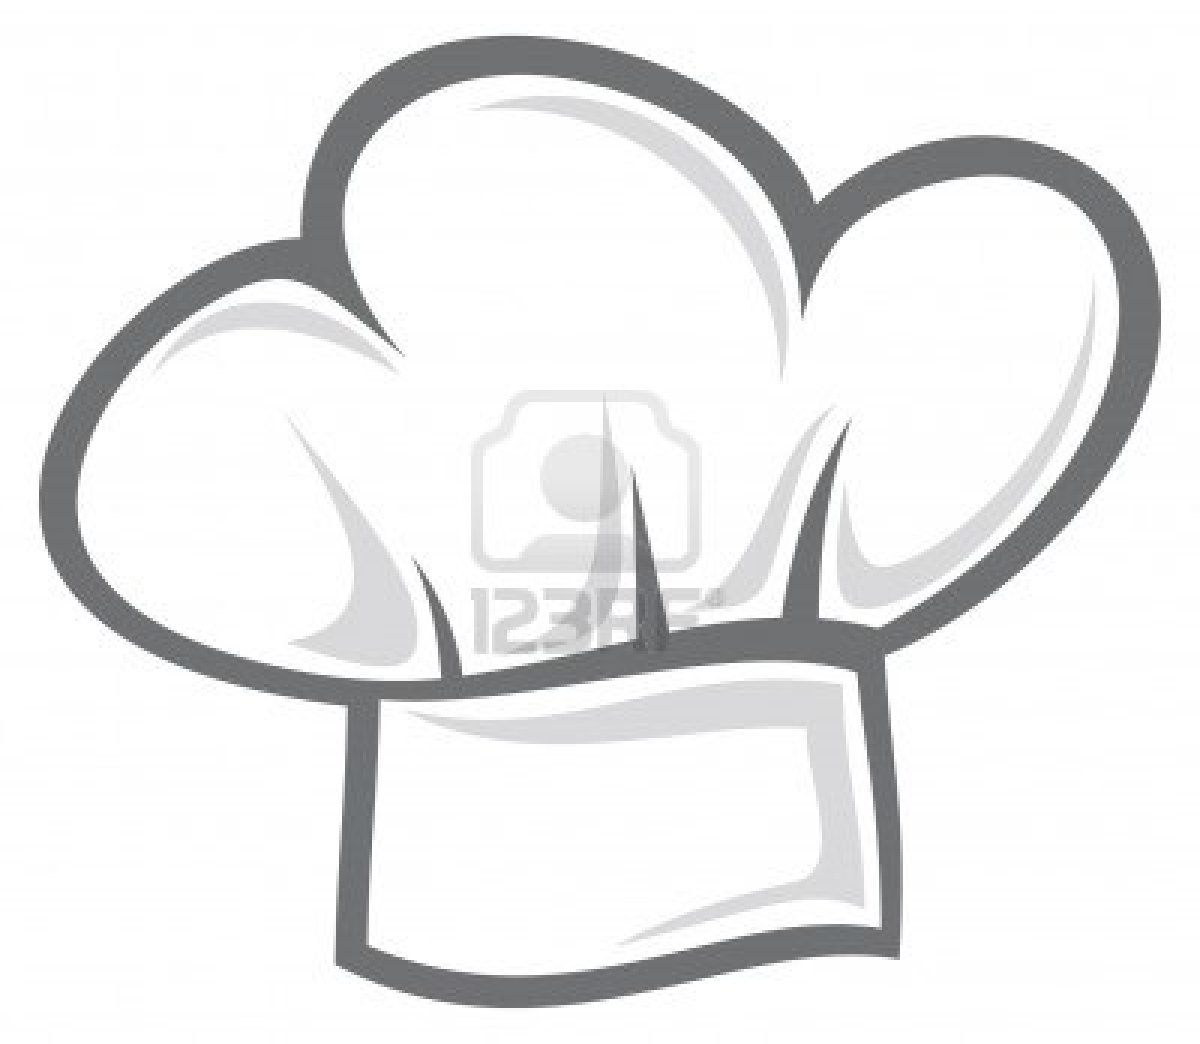 free chef hat clipart images - photo #25